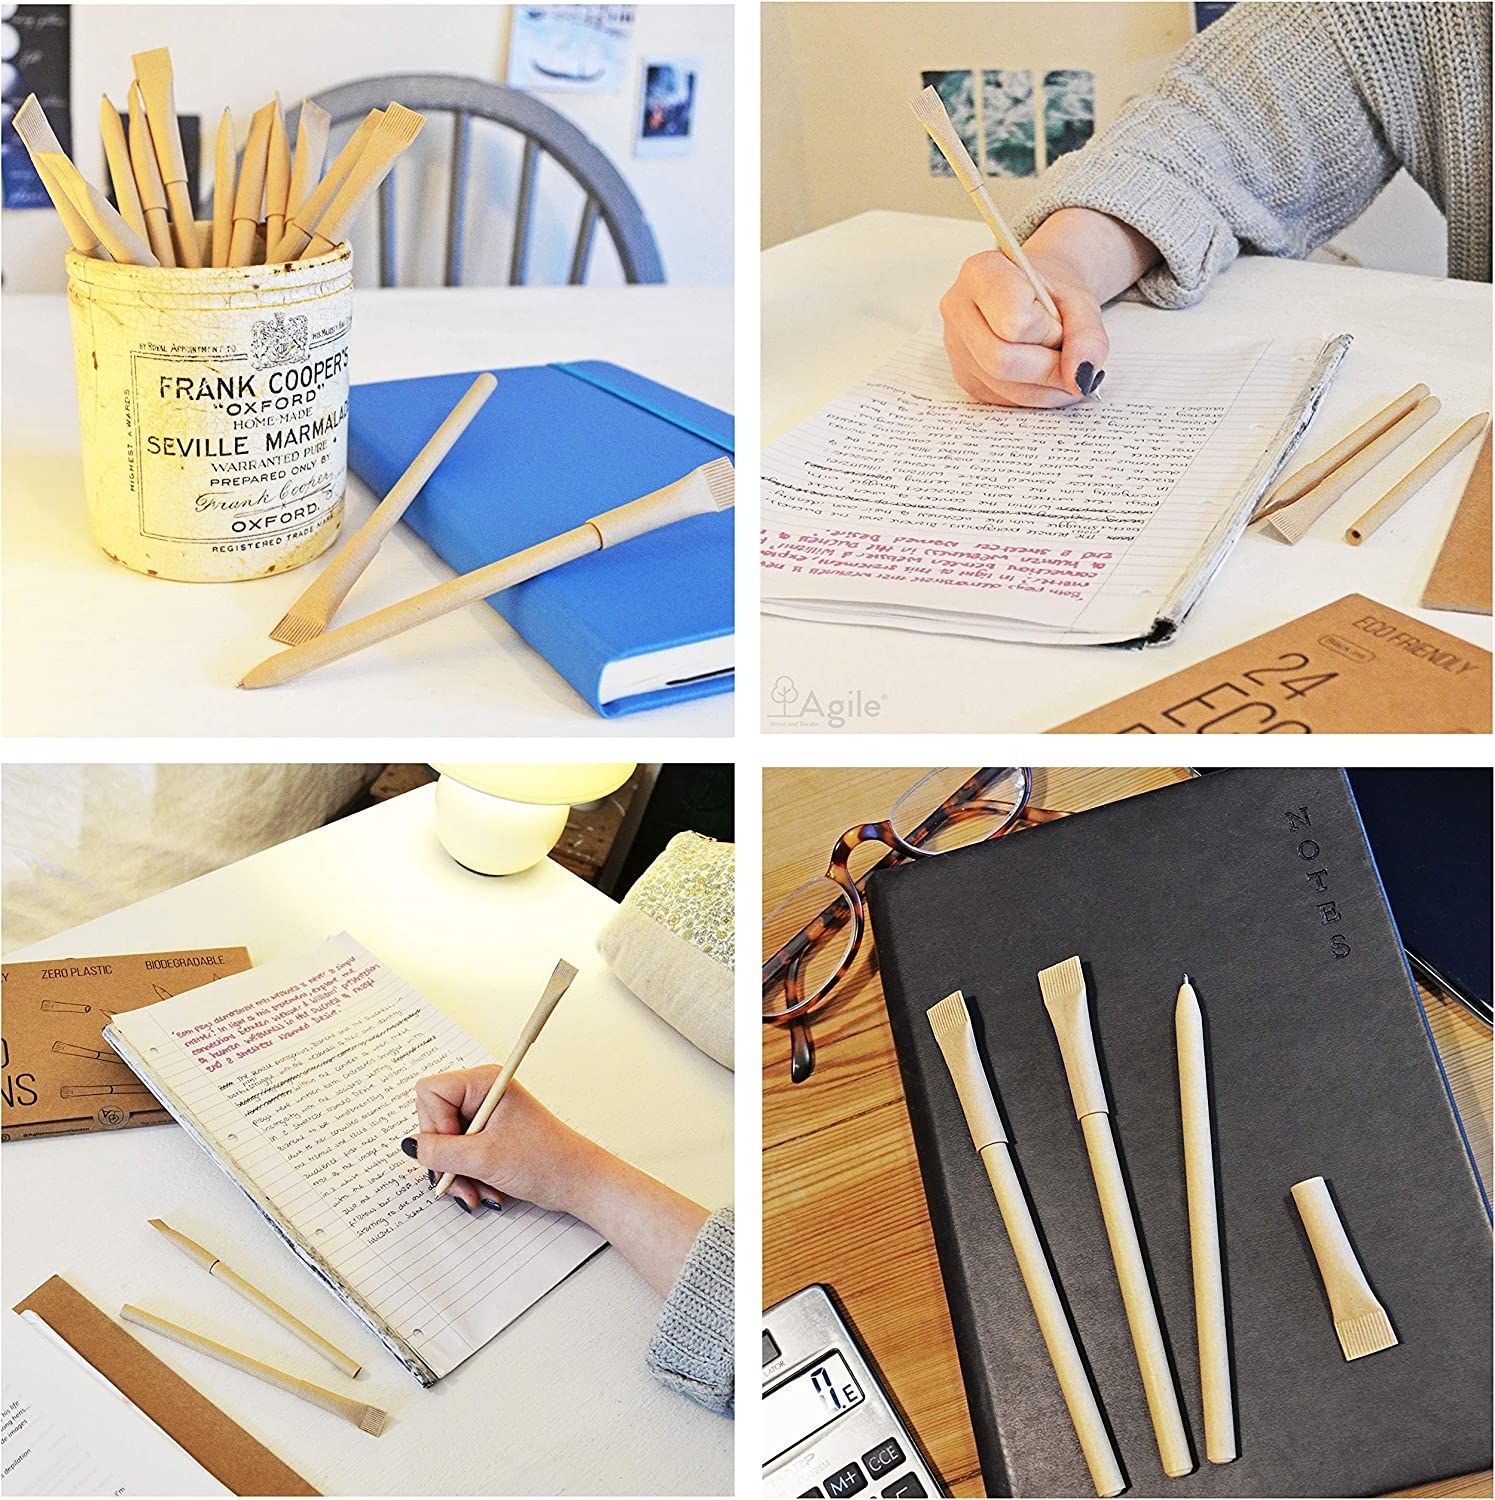 Four-way split photo collage showing the pens in various settings: stored in jar, being used to take notes on piece of paper, spread on top of leather journal